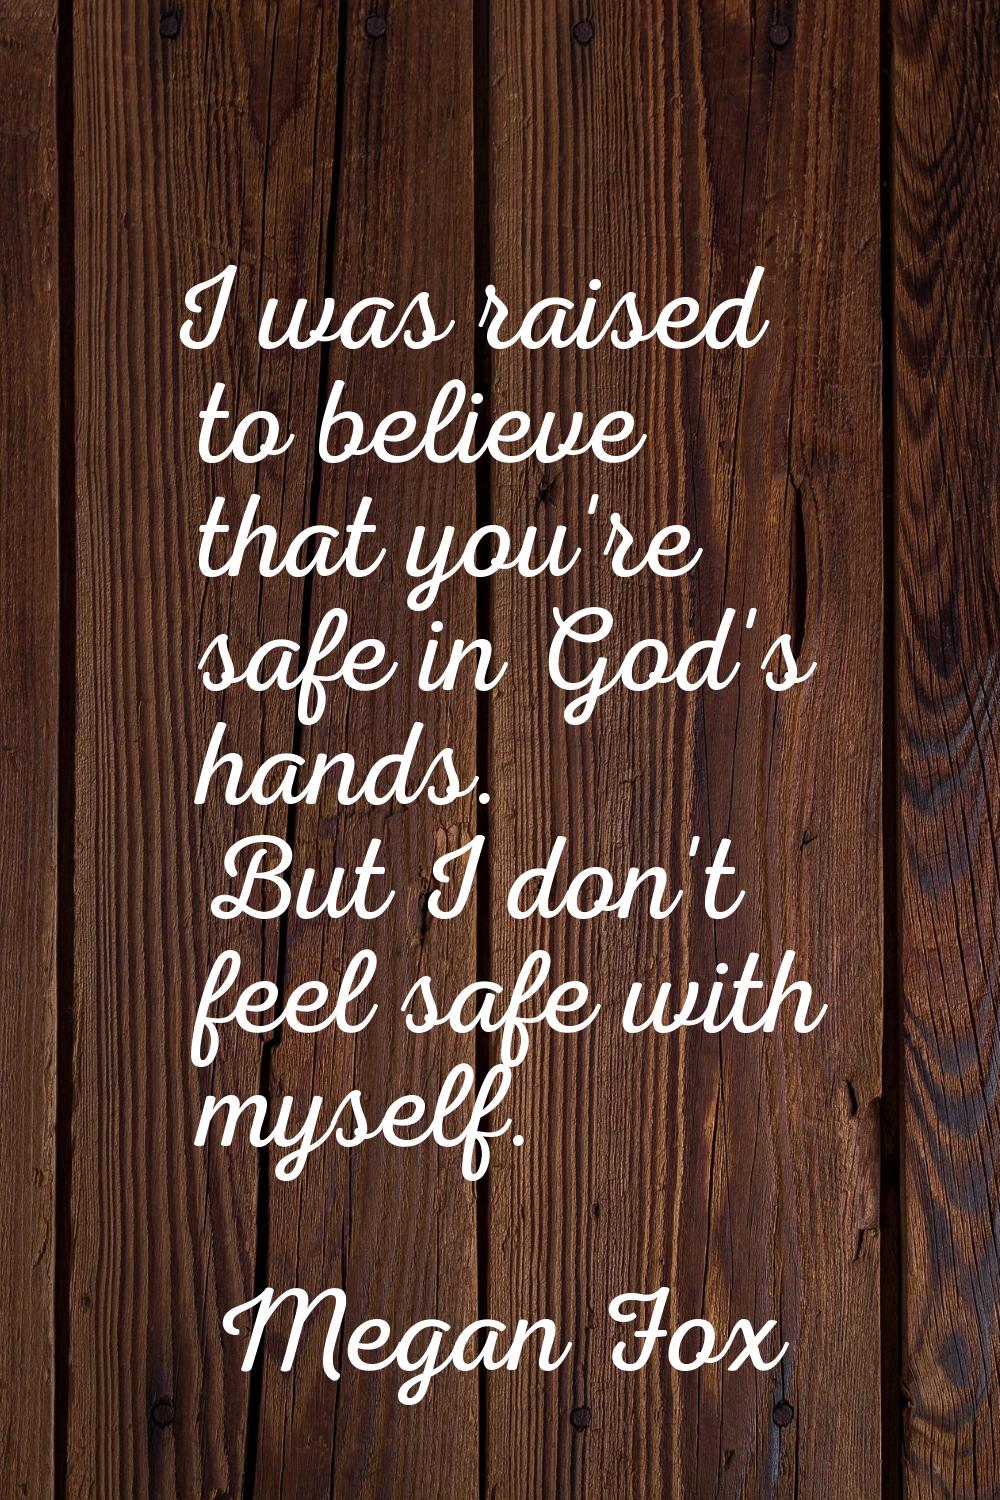 I was raised to believe that you're safe in God's hands. But I don't feel safe with myself.